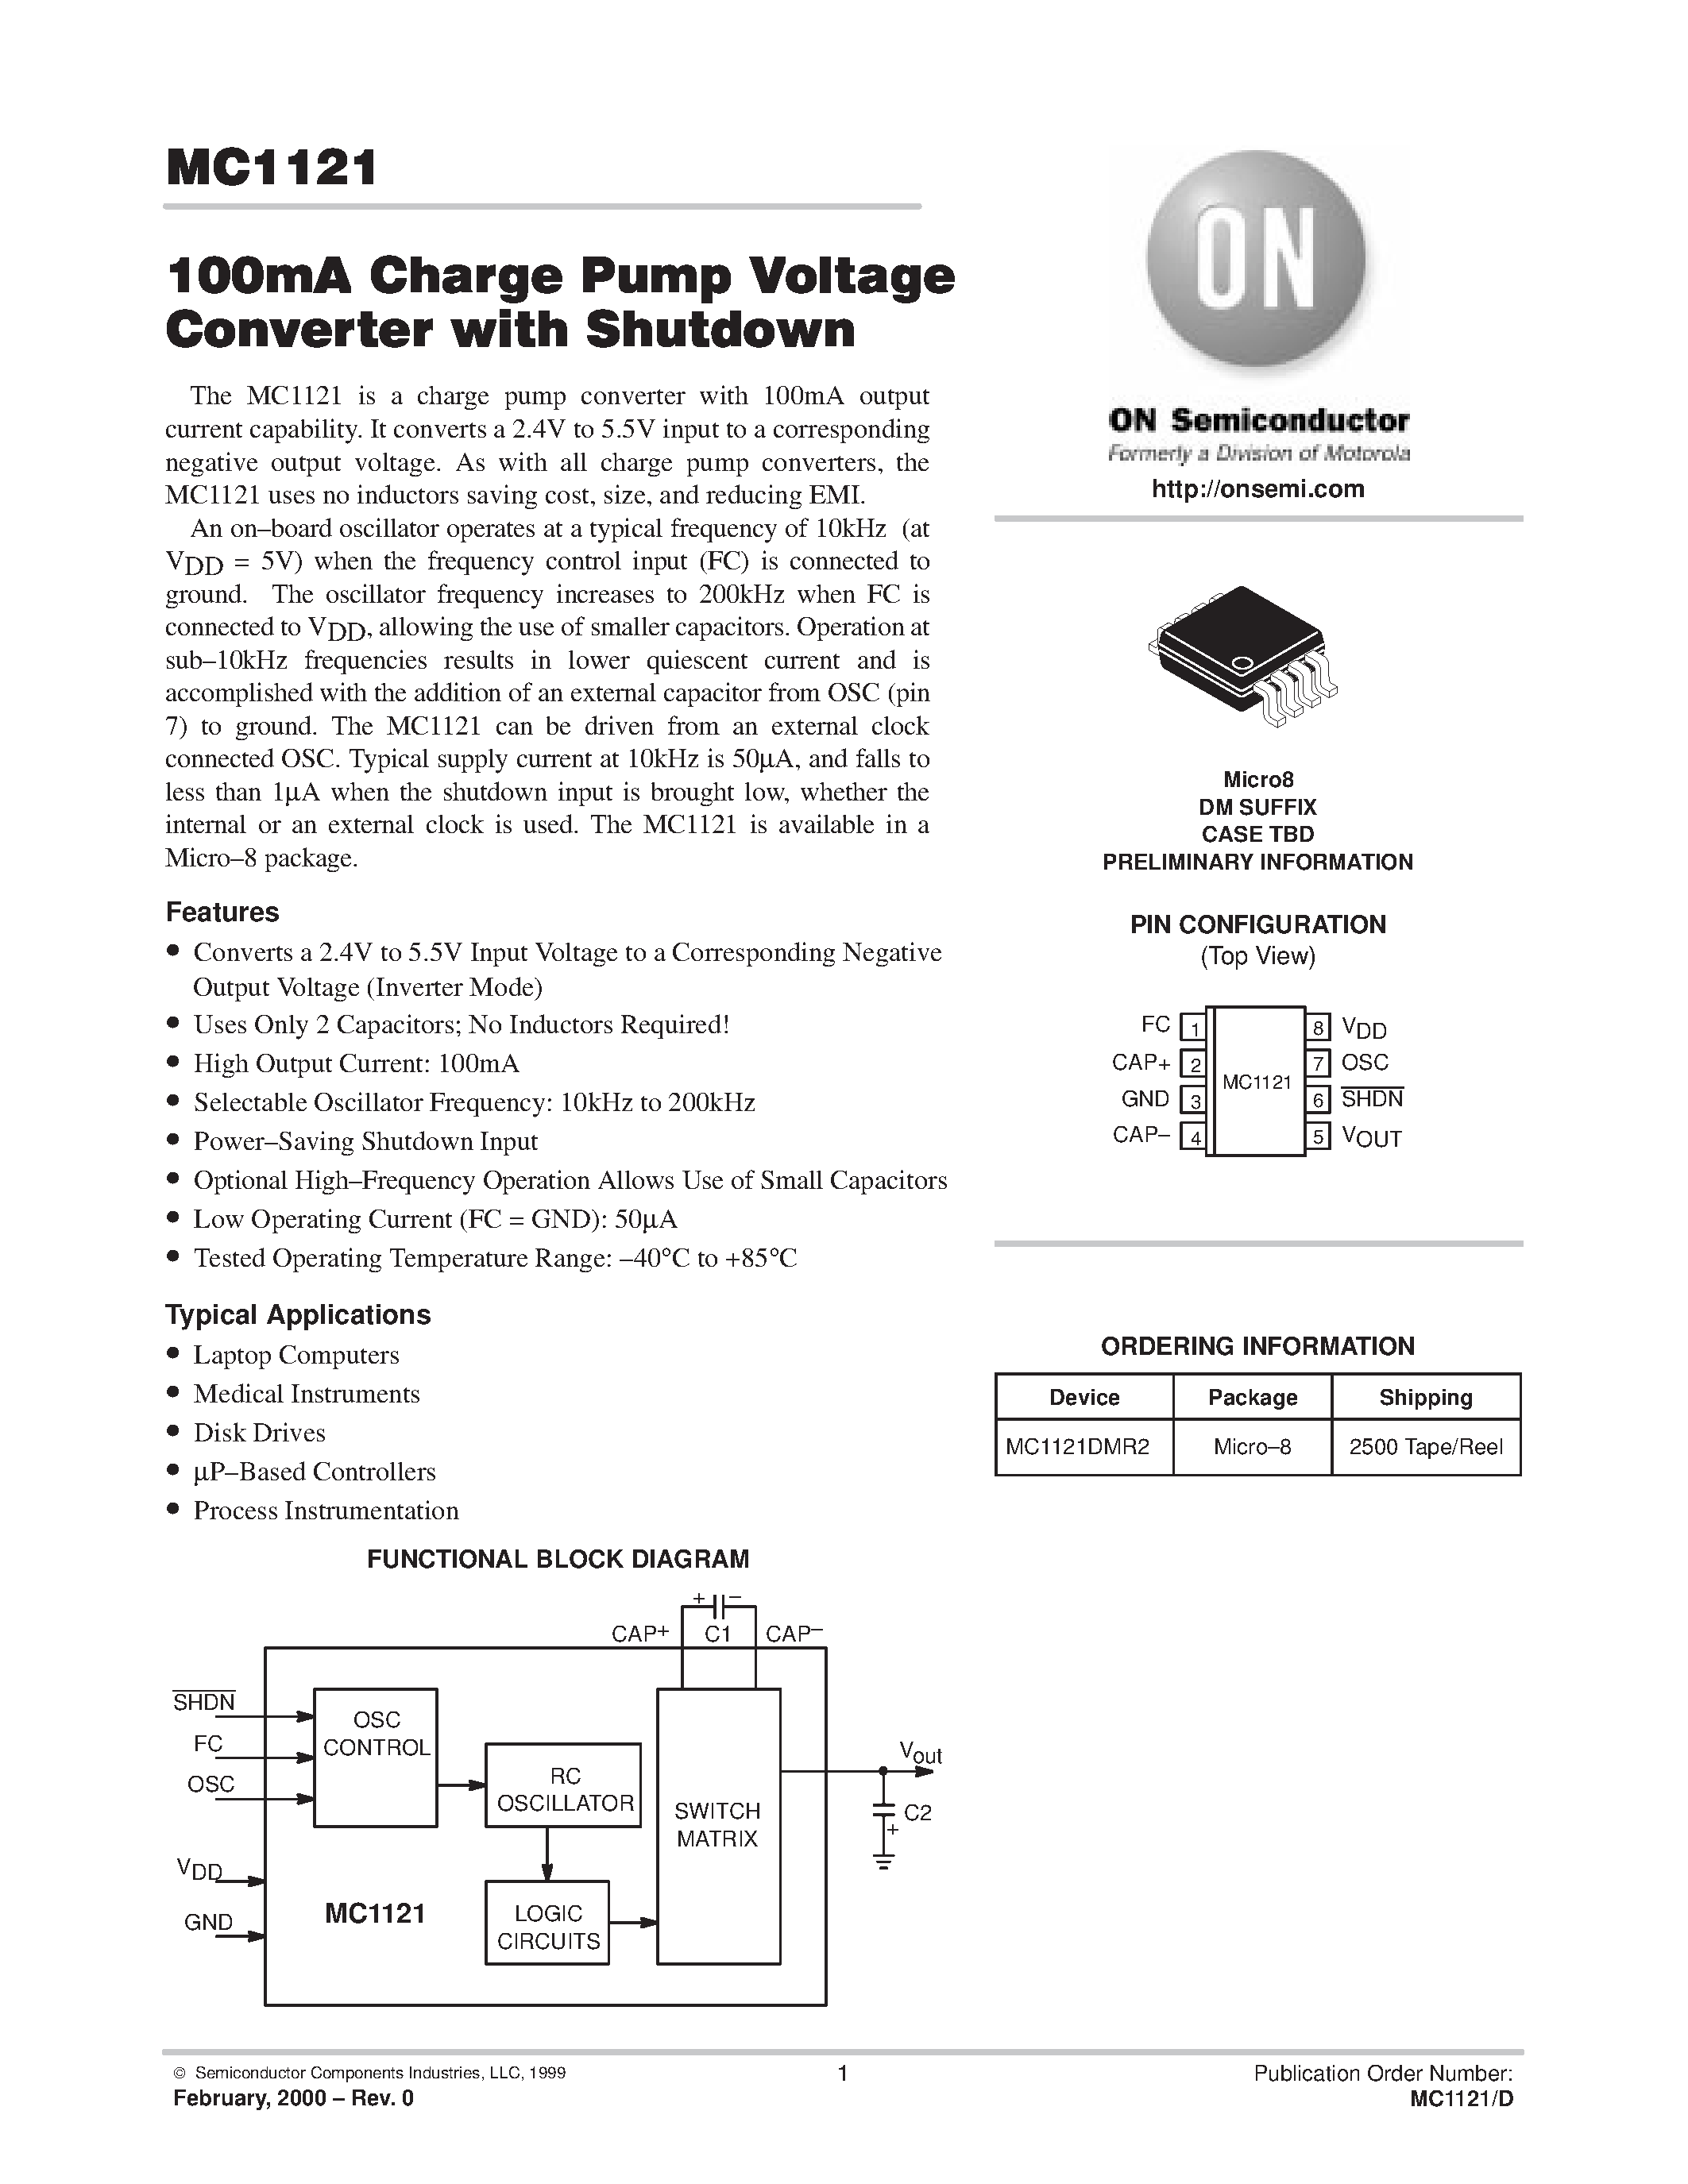 Datasheet MC1121 - 100mA Charge Pump Voltage Converter with Shutdown page 1